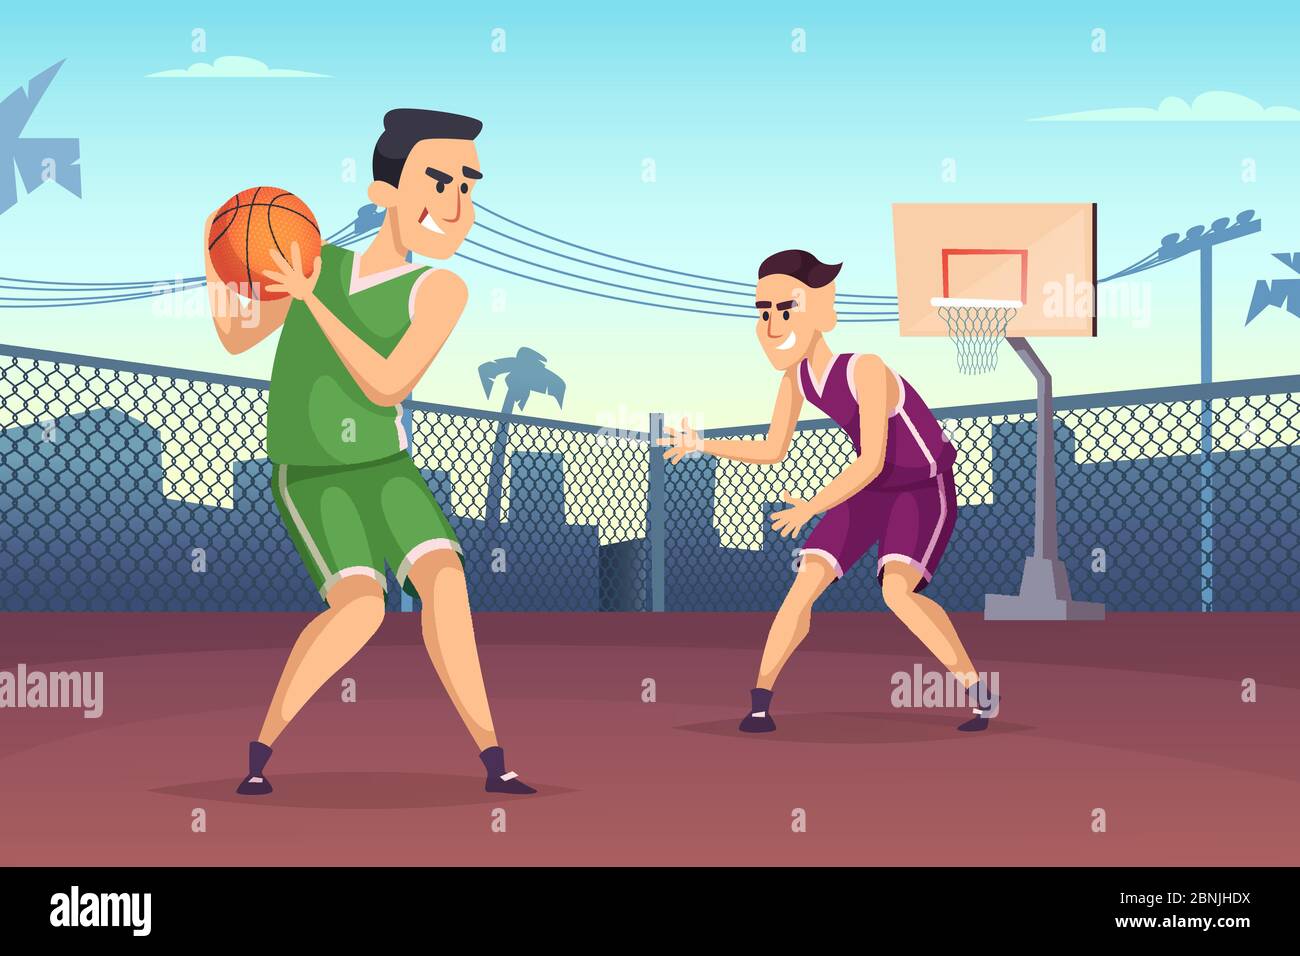 Background illustrations of basketball players playing on the court Stock Vector